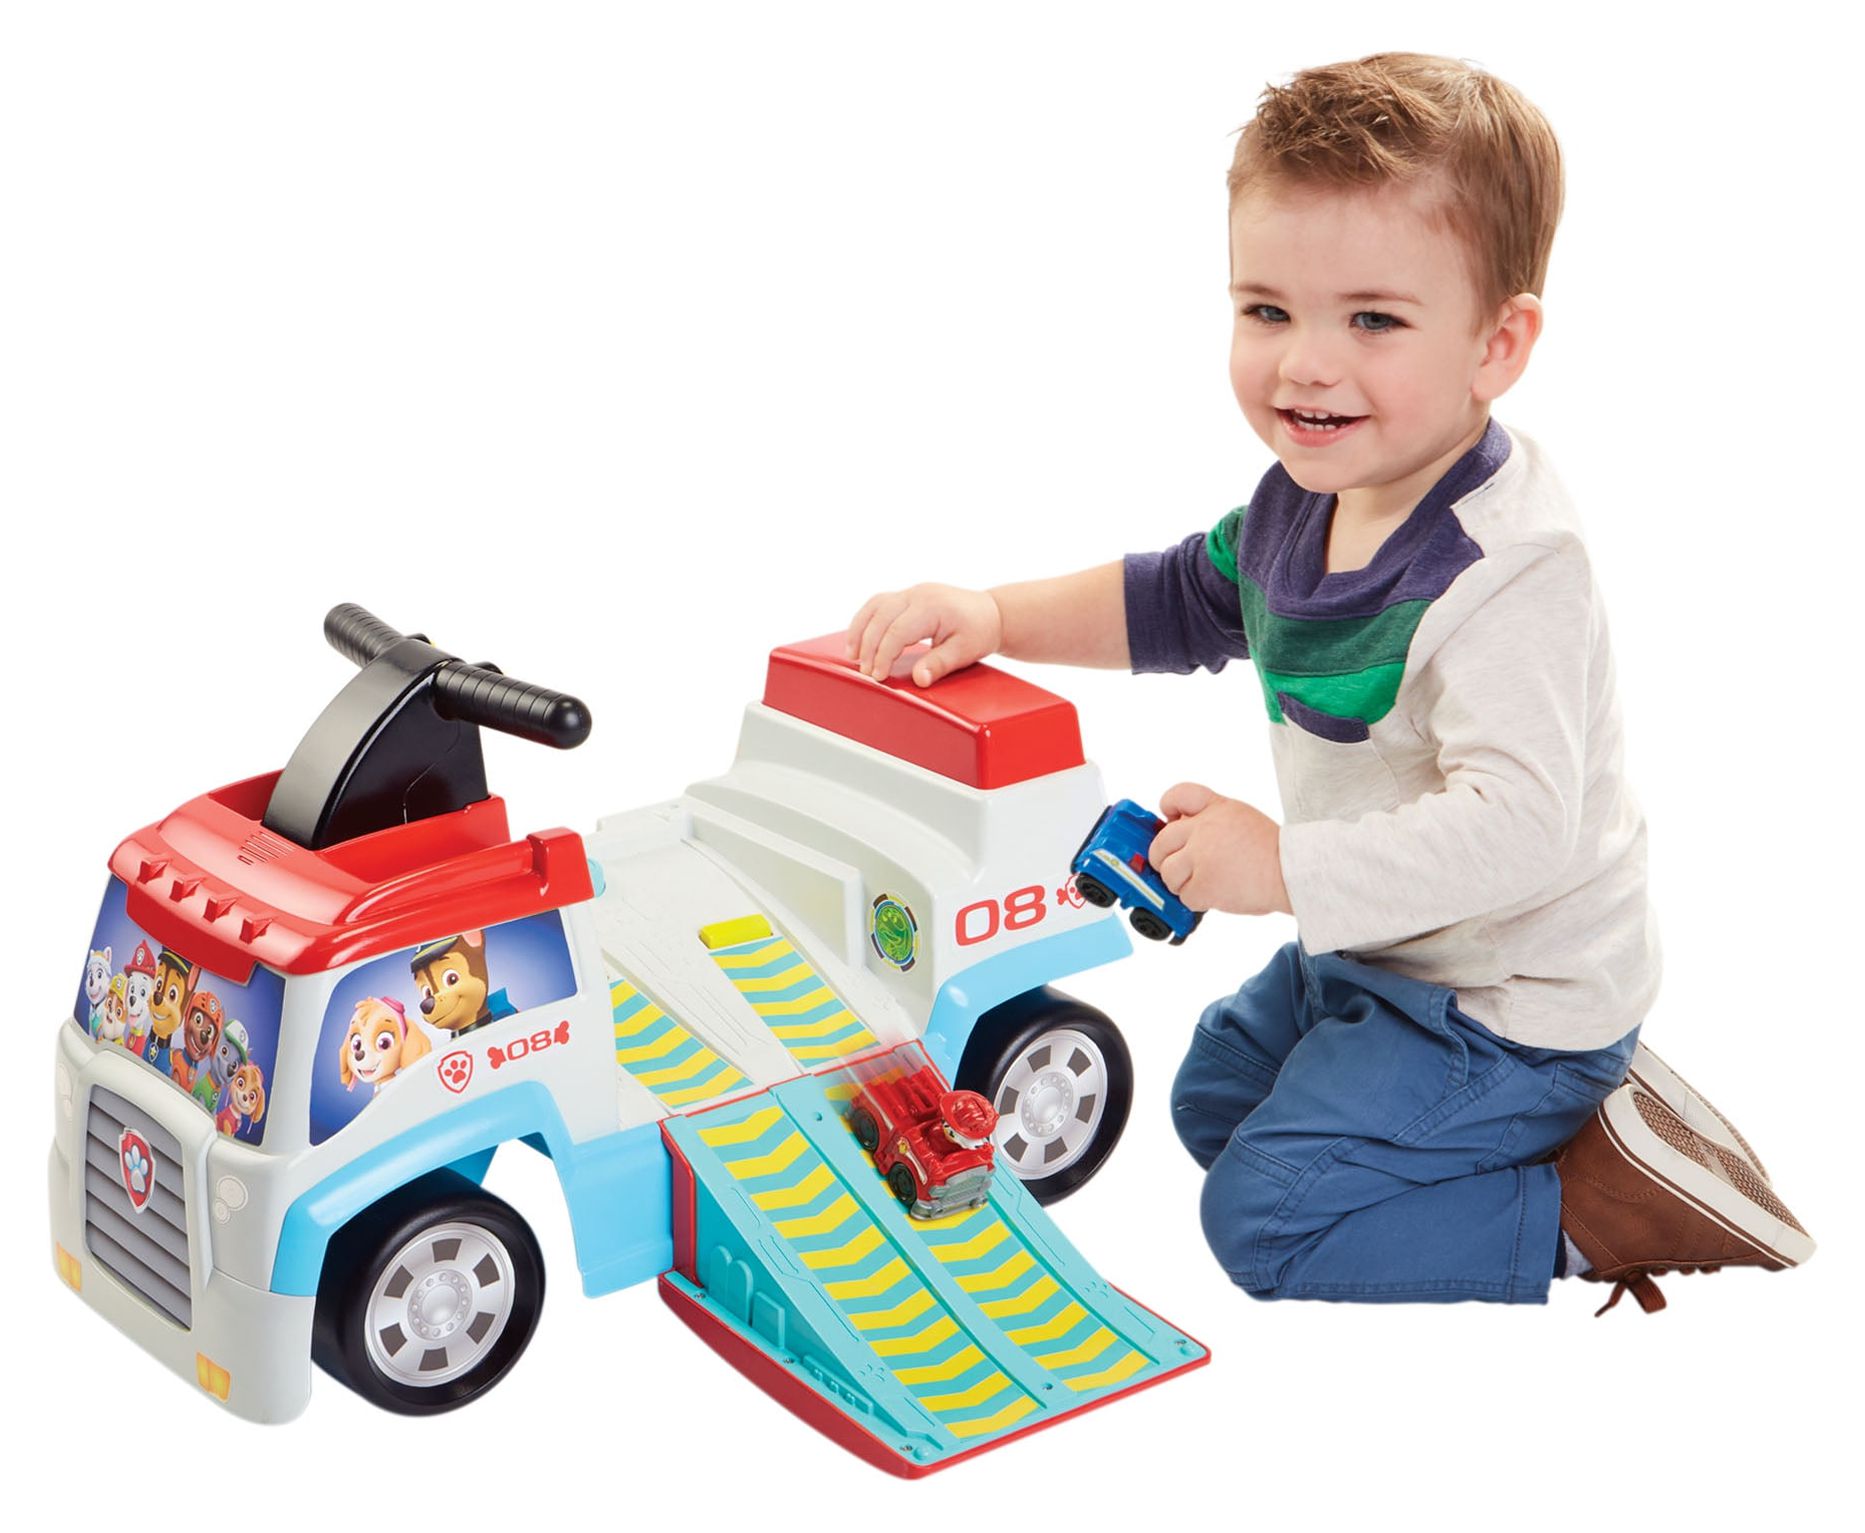 PAW Patrol Patroller Ride-On Includes Chase and Marshall Mini Vehicles - image 1 of 5